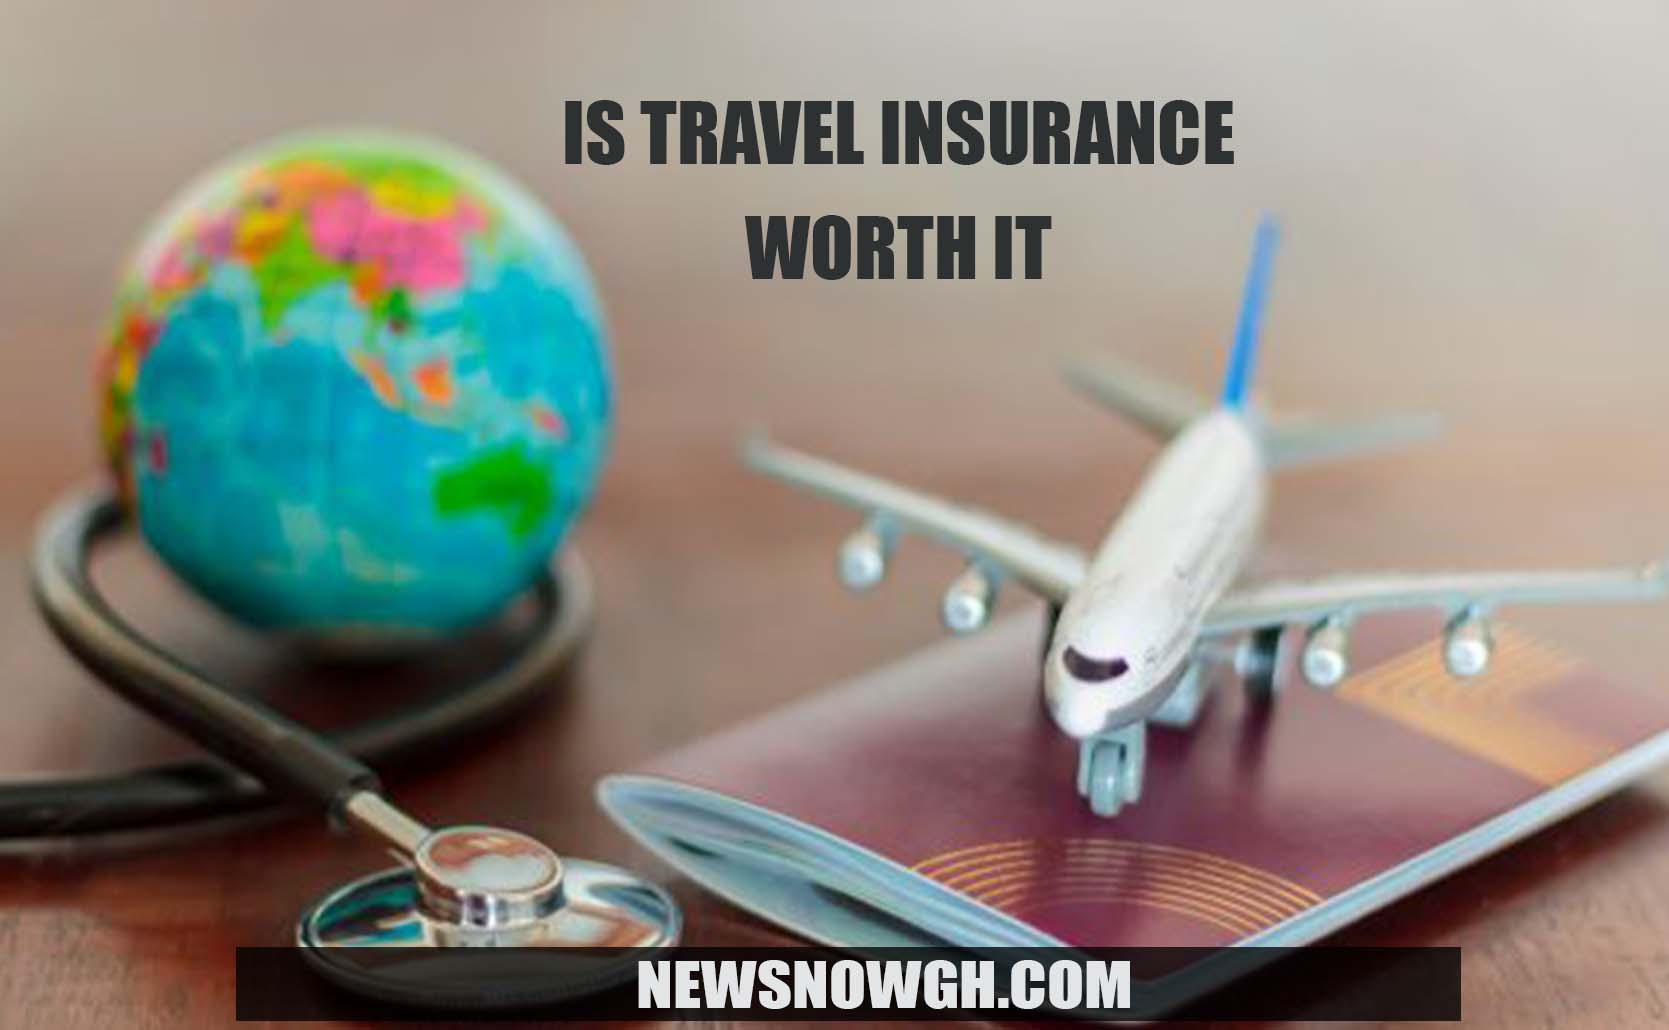 is a travel insurance worth it